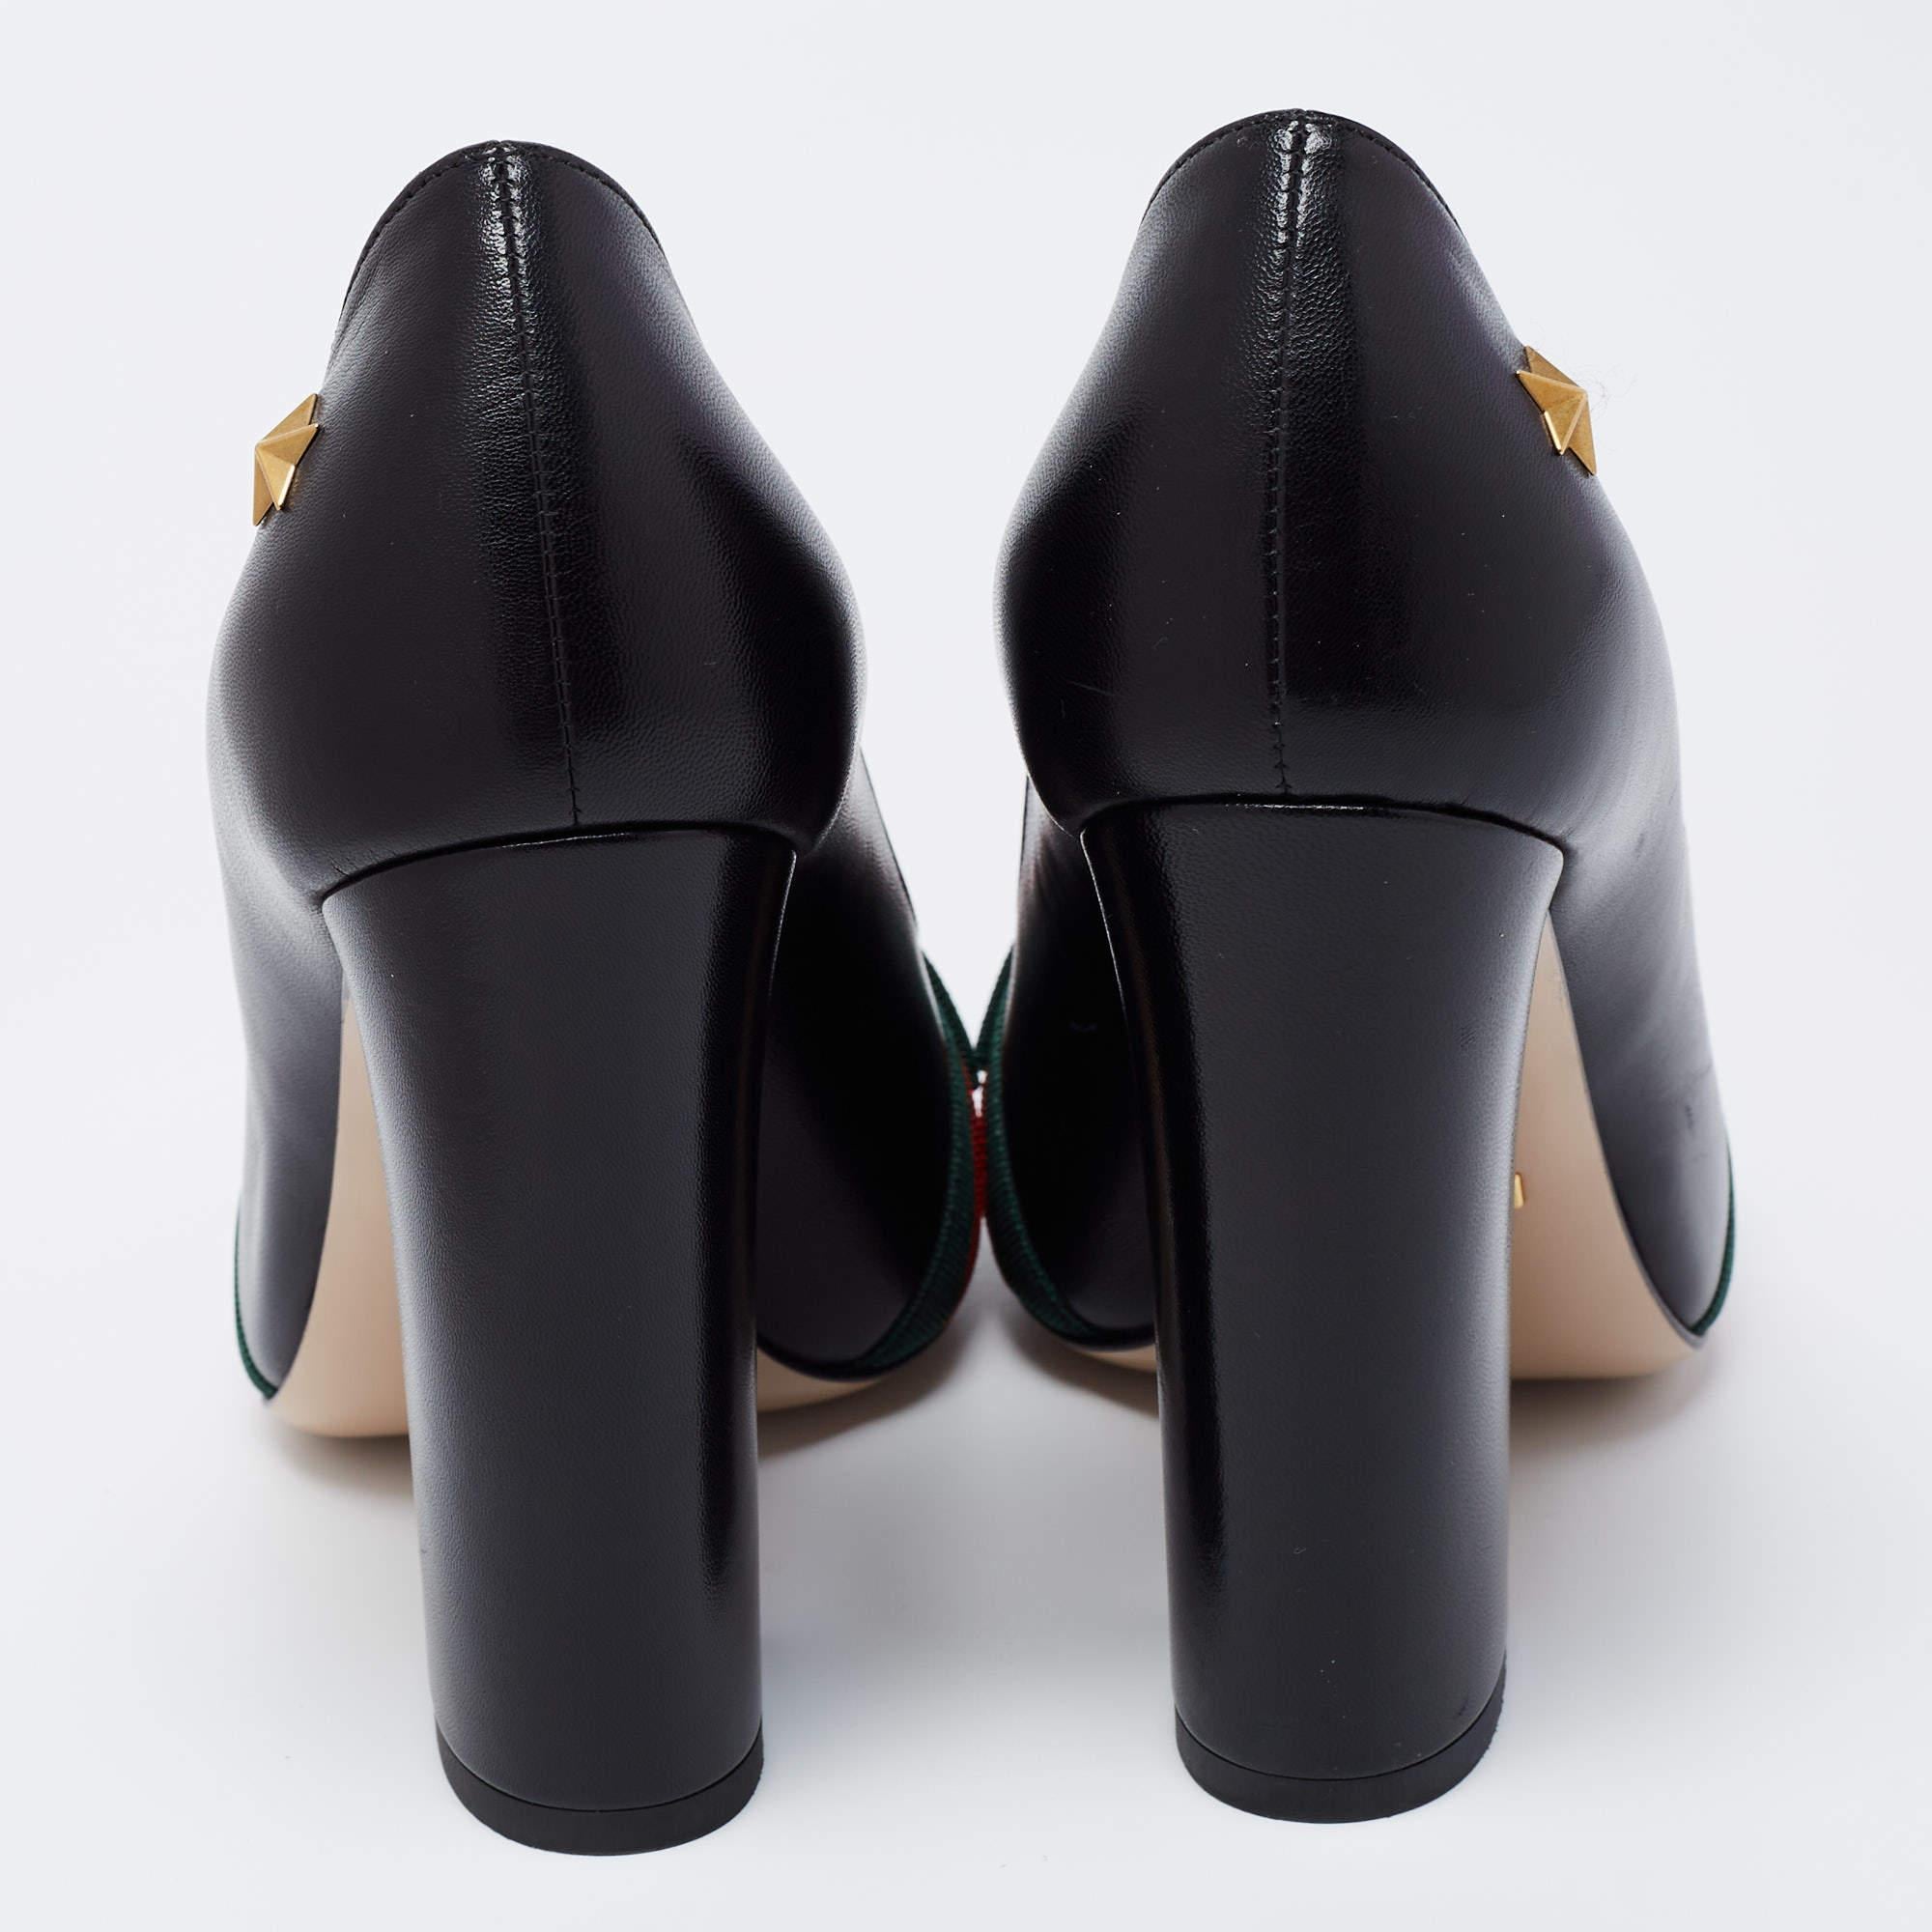 These curvaceous pumps will add immense style to your look. Crafted from luxurious material, they feature well-lined insoles that offer endless comfort.

Includes: Original Dustbag